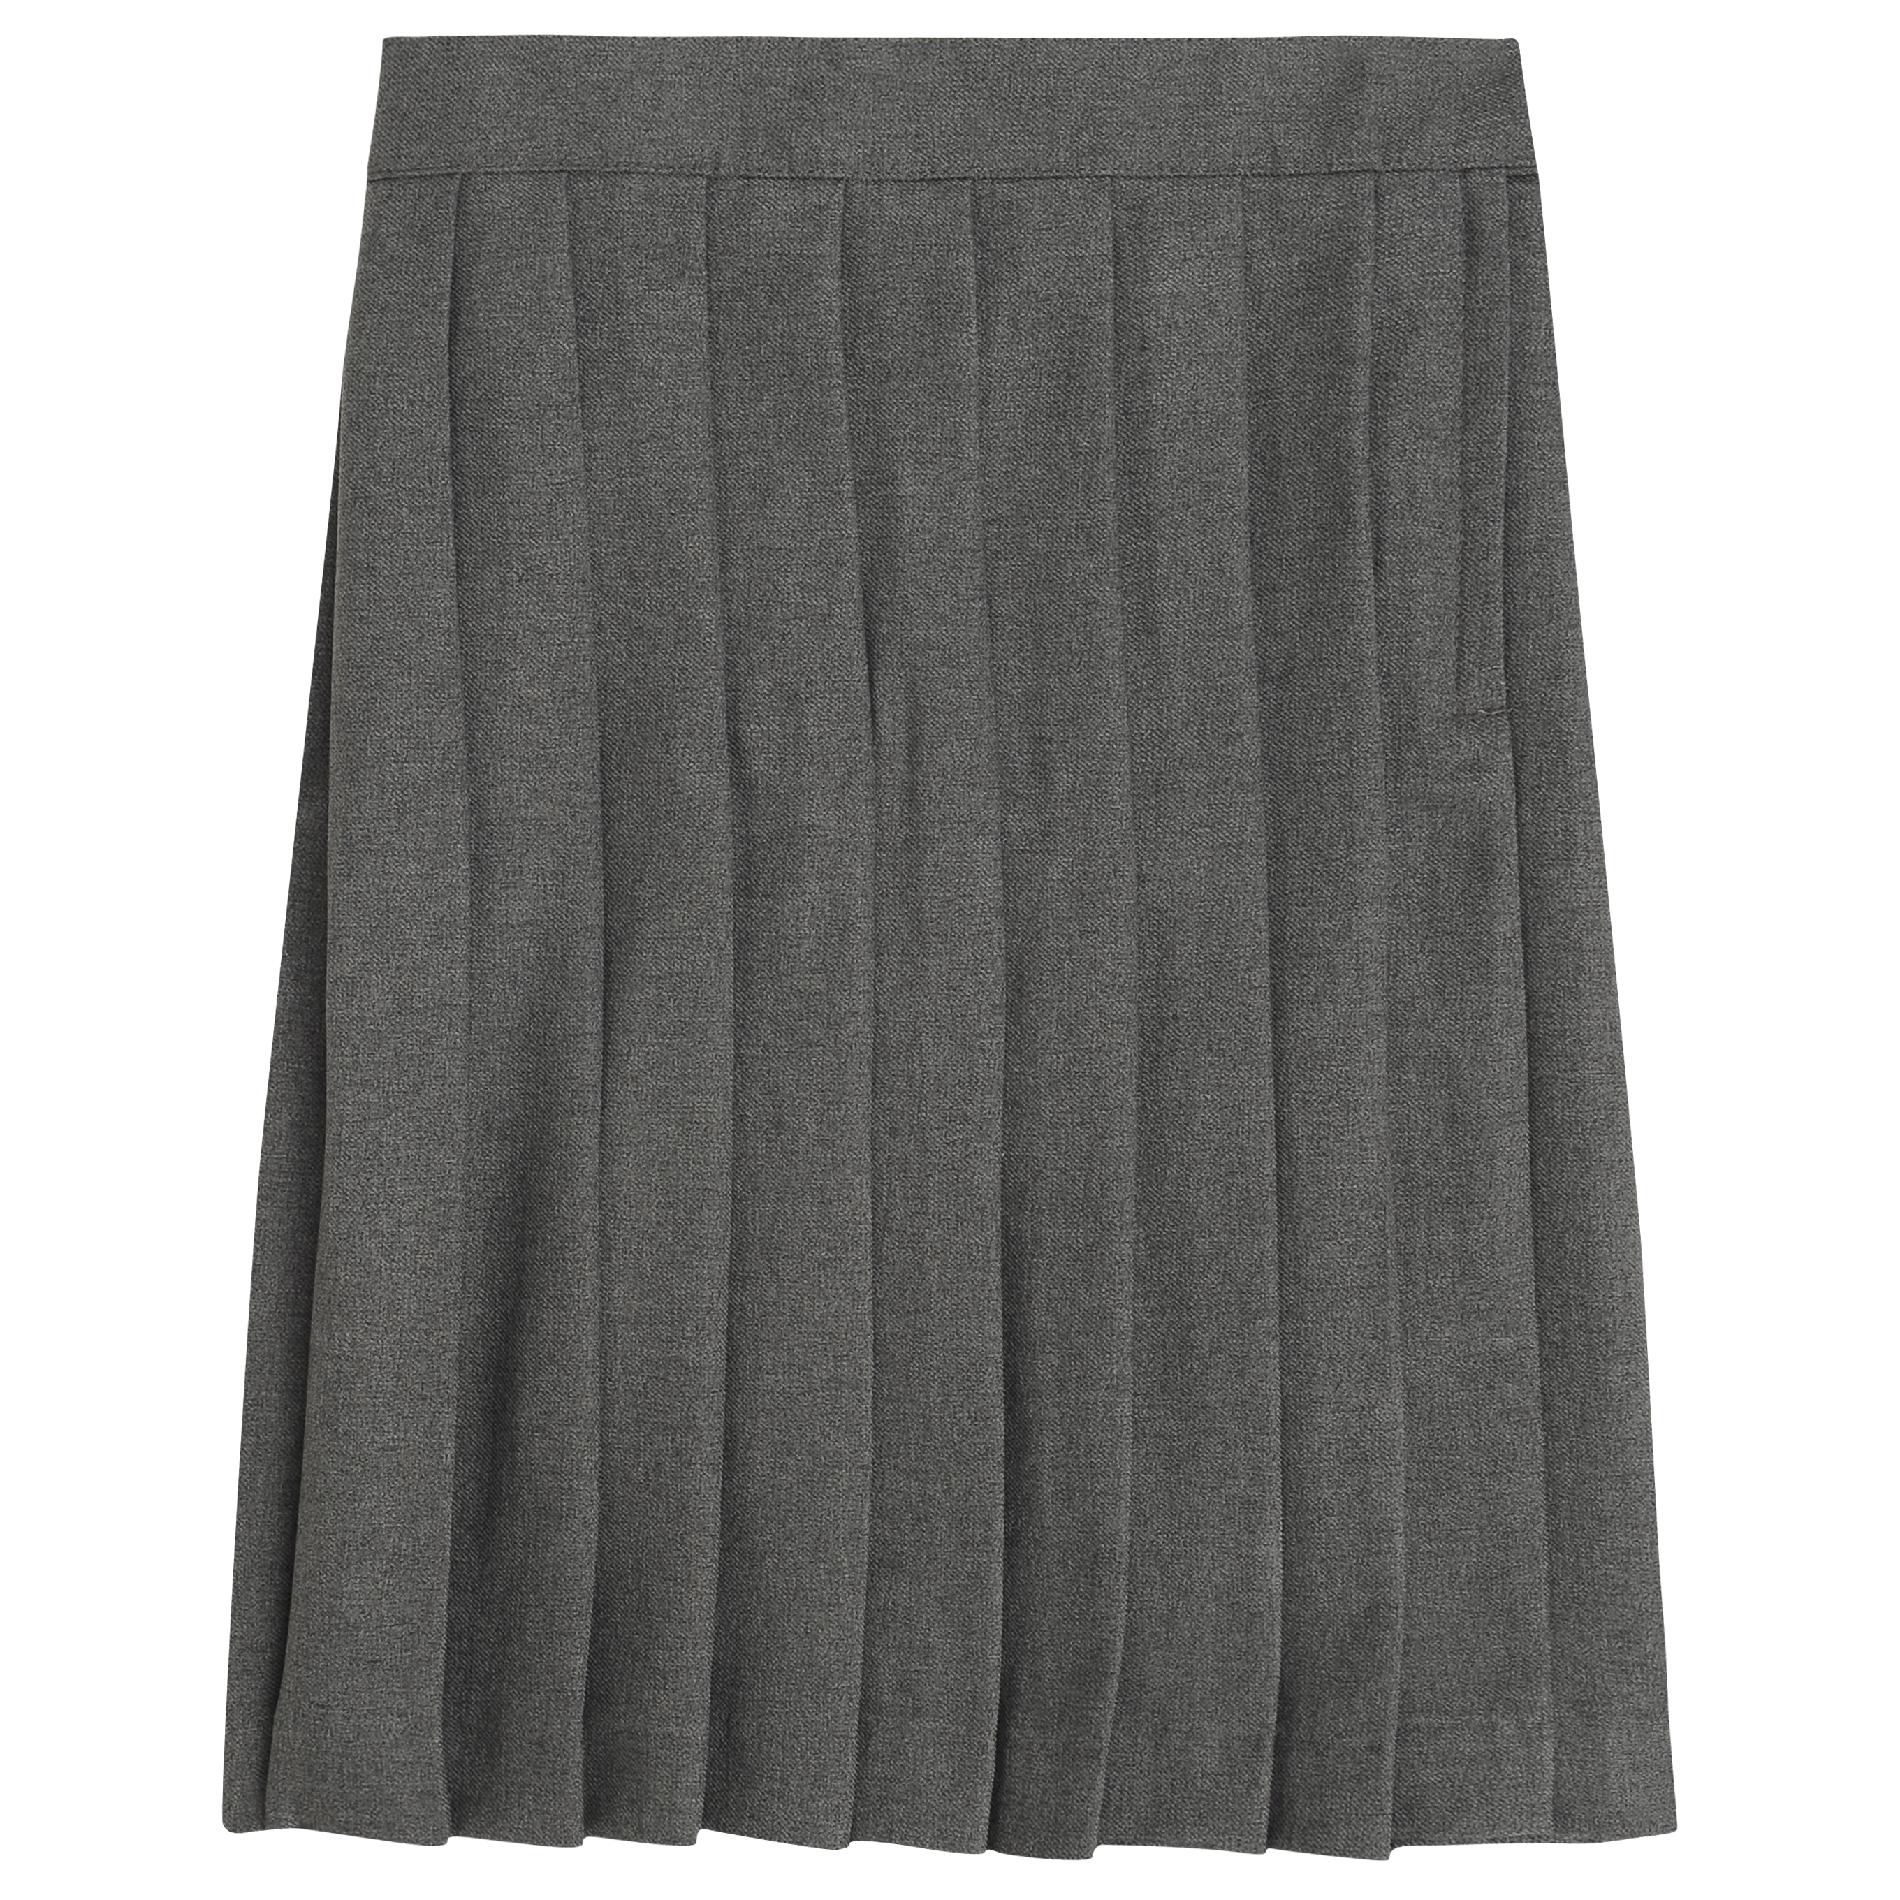 At School by French Toast Girls Plus Size Pleated Skirt